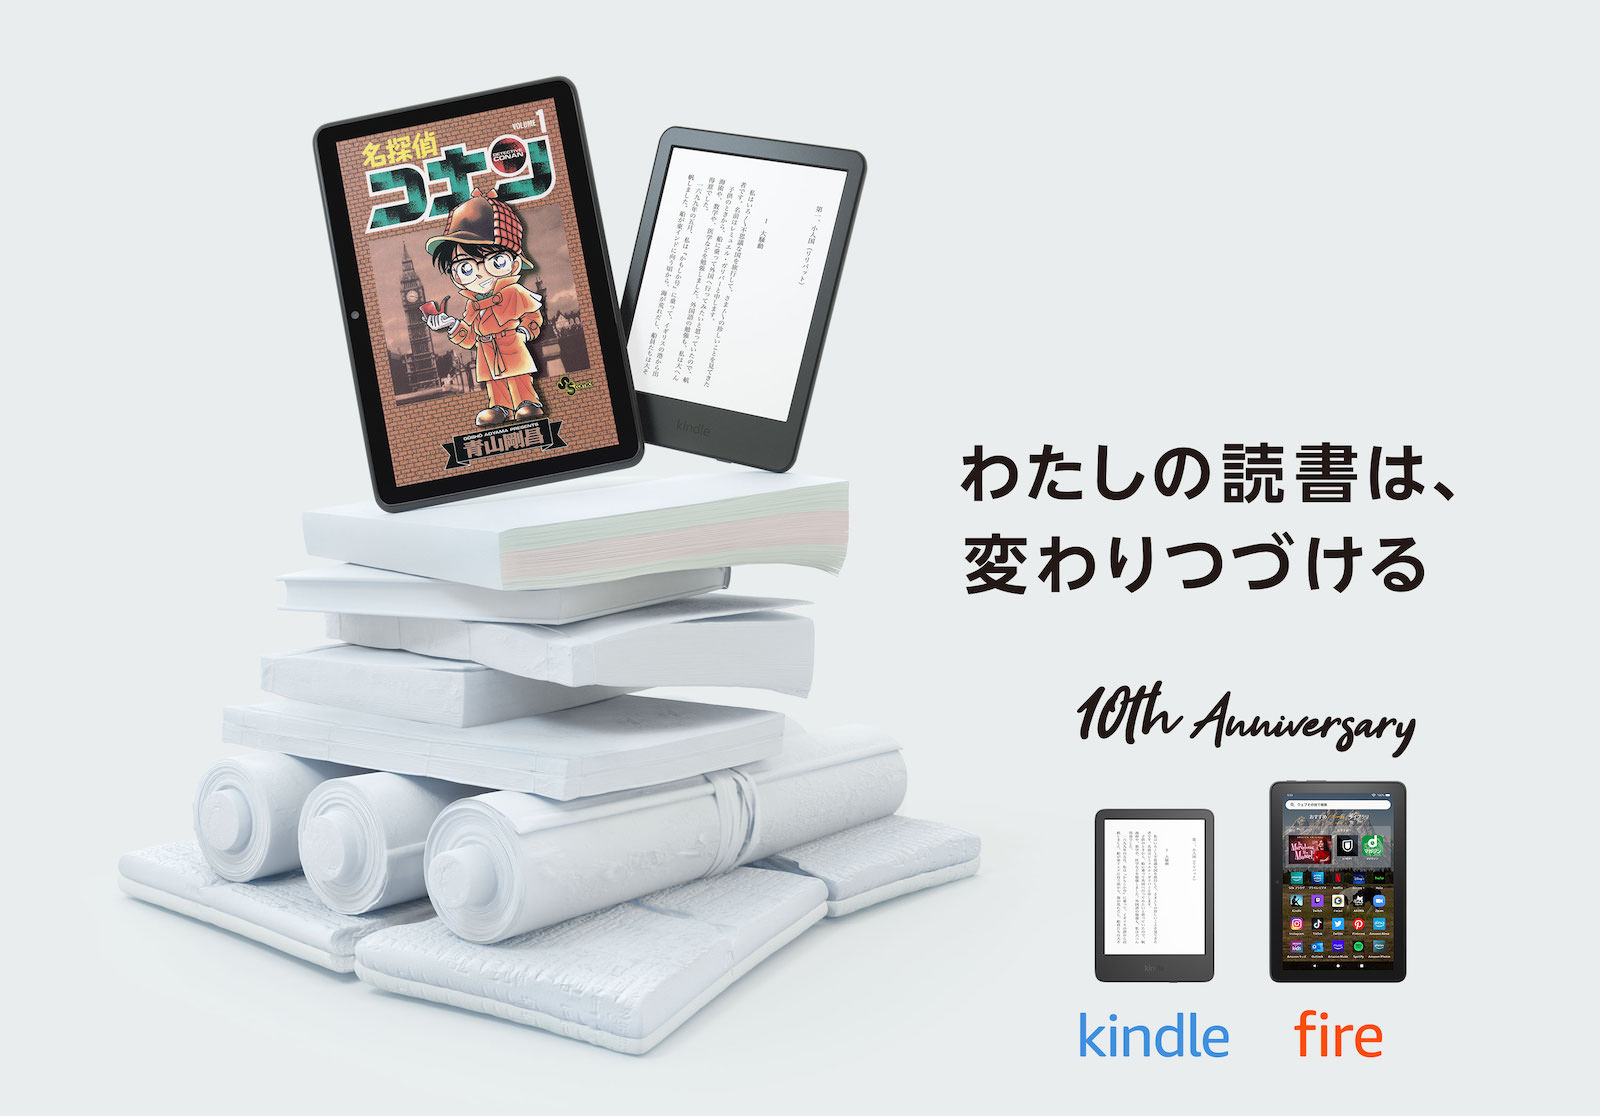 Kindle store 10th anniversary in japan